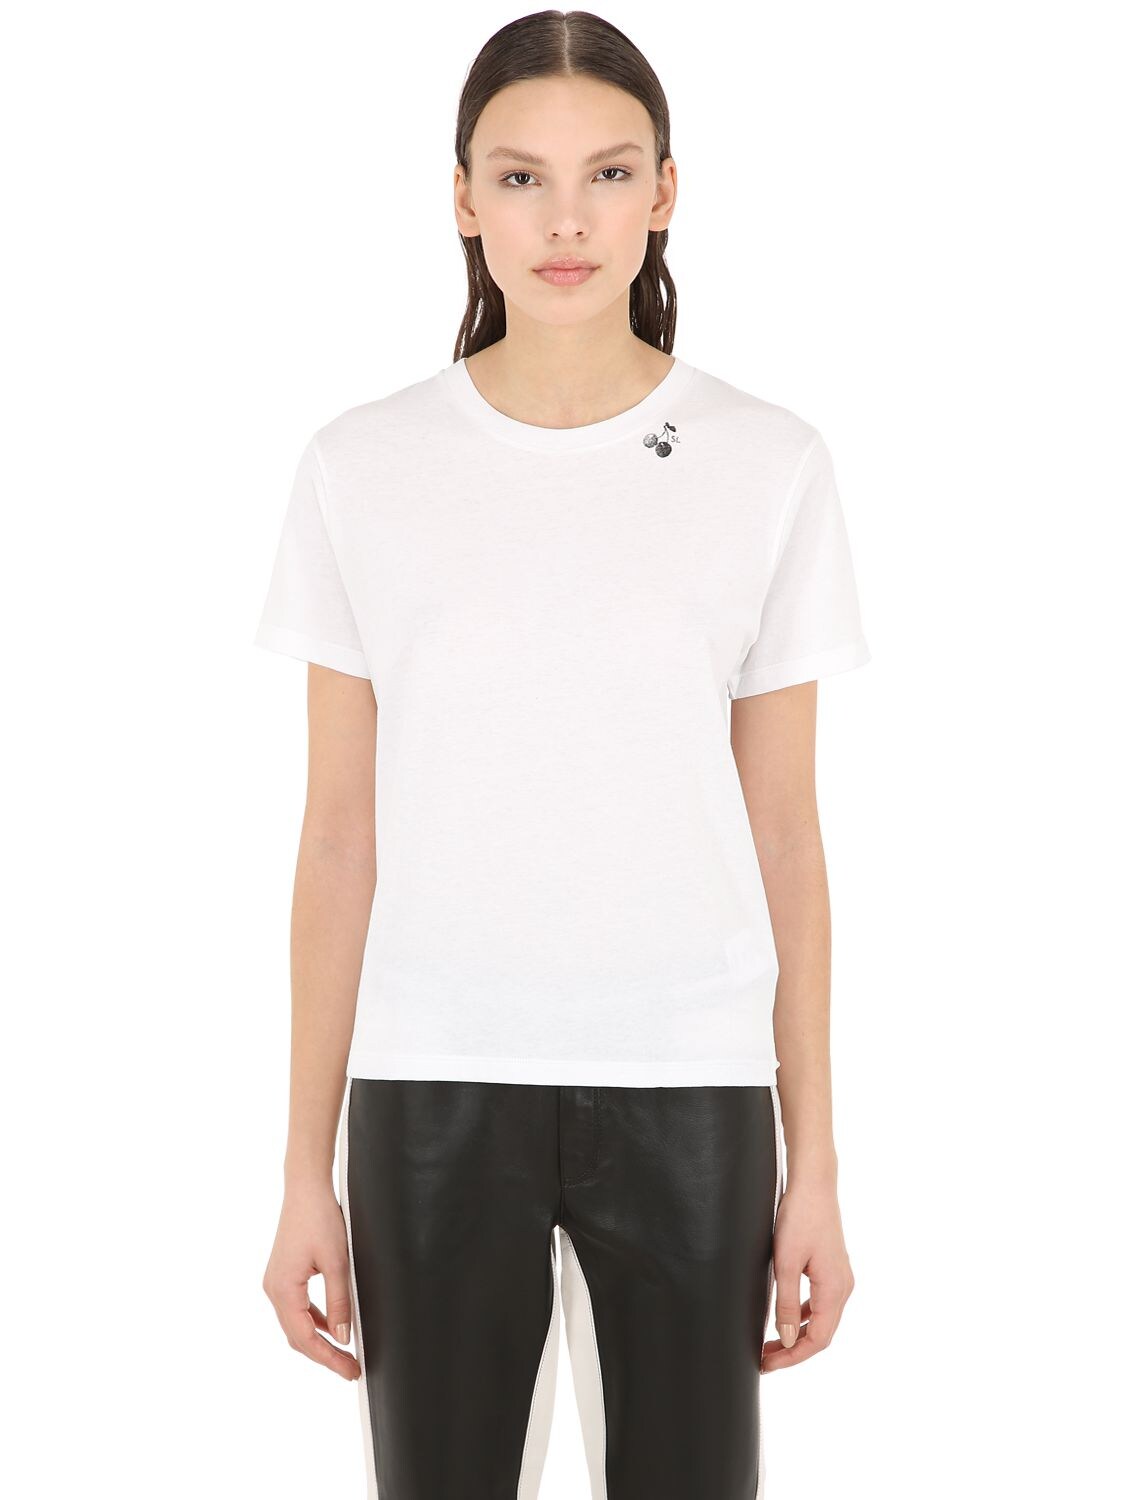 Saint Laurent Printed Cotton Jersey T-shirt In White